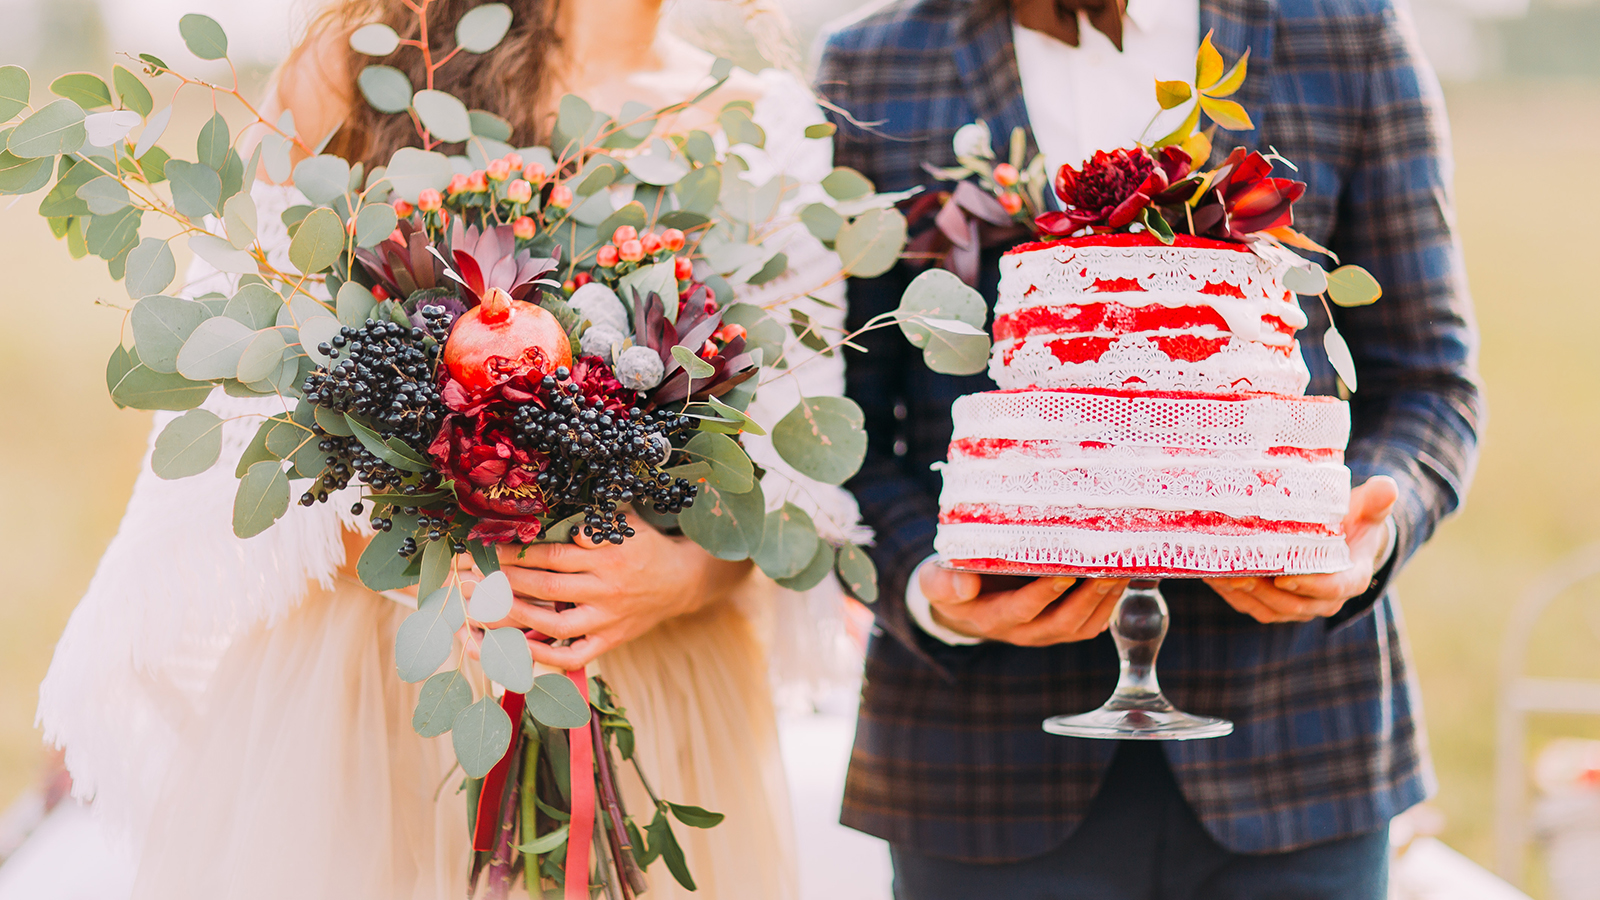 Wedding couple holds beautiful cake and bouquet close up.